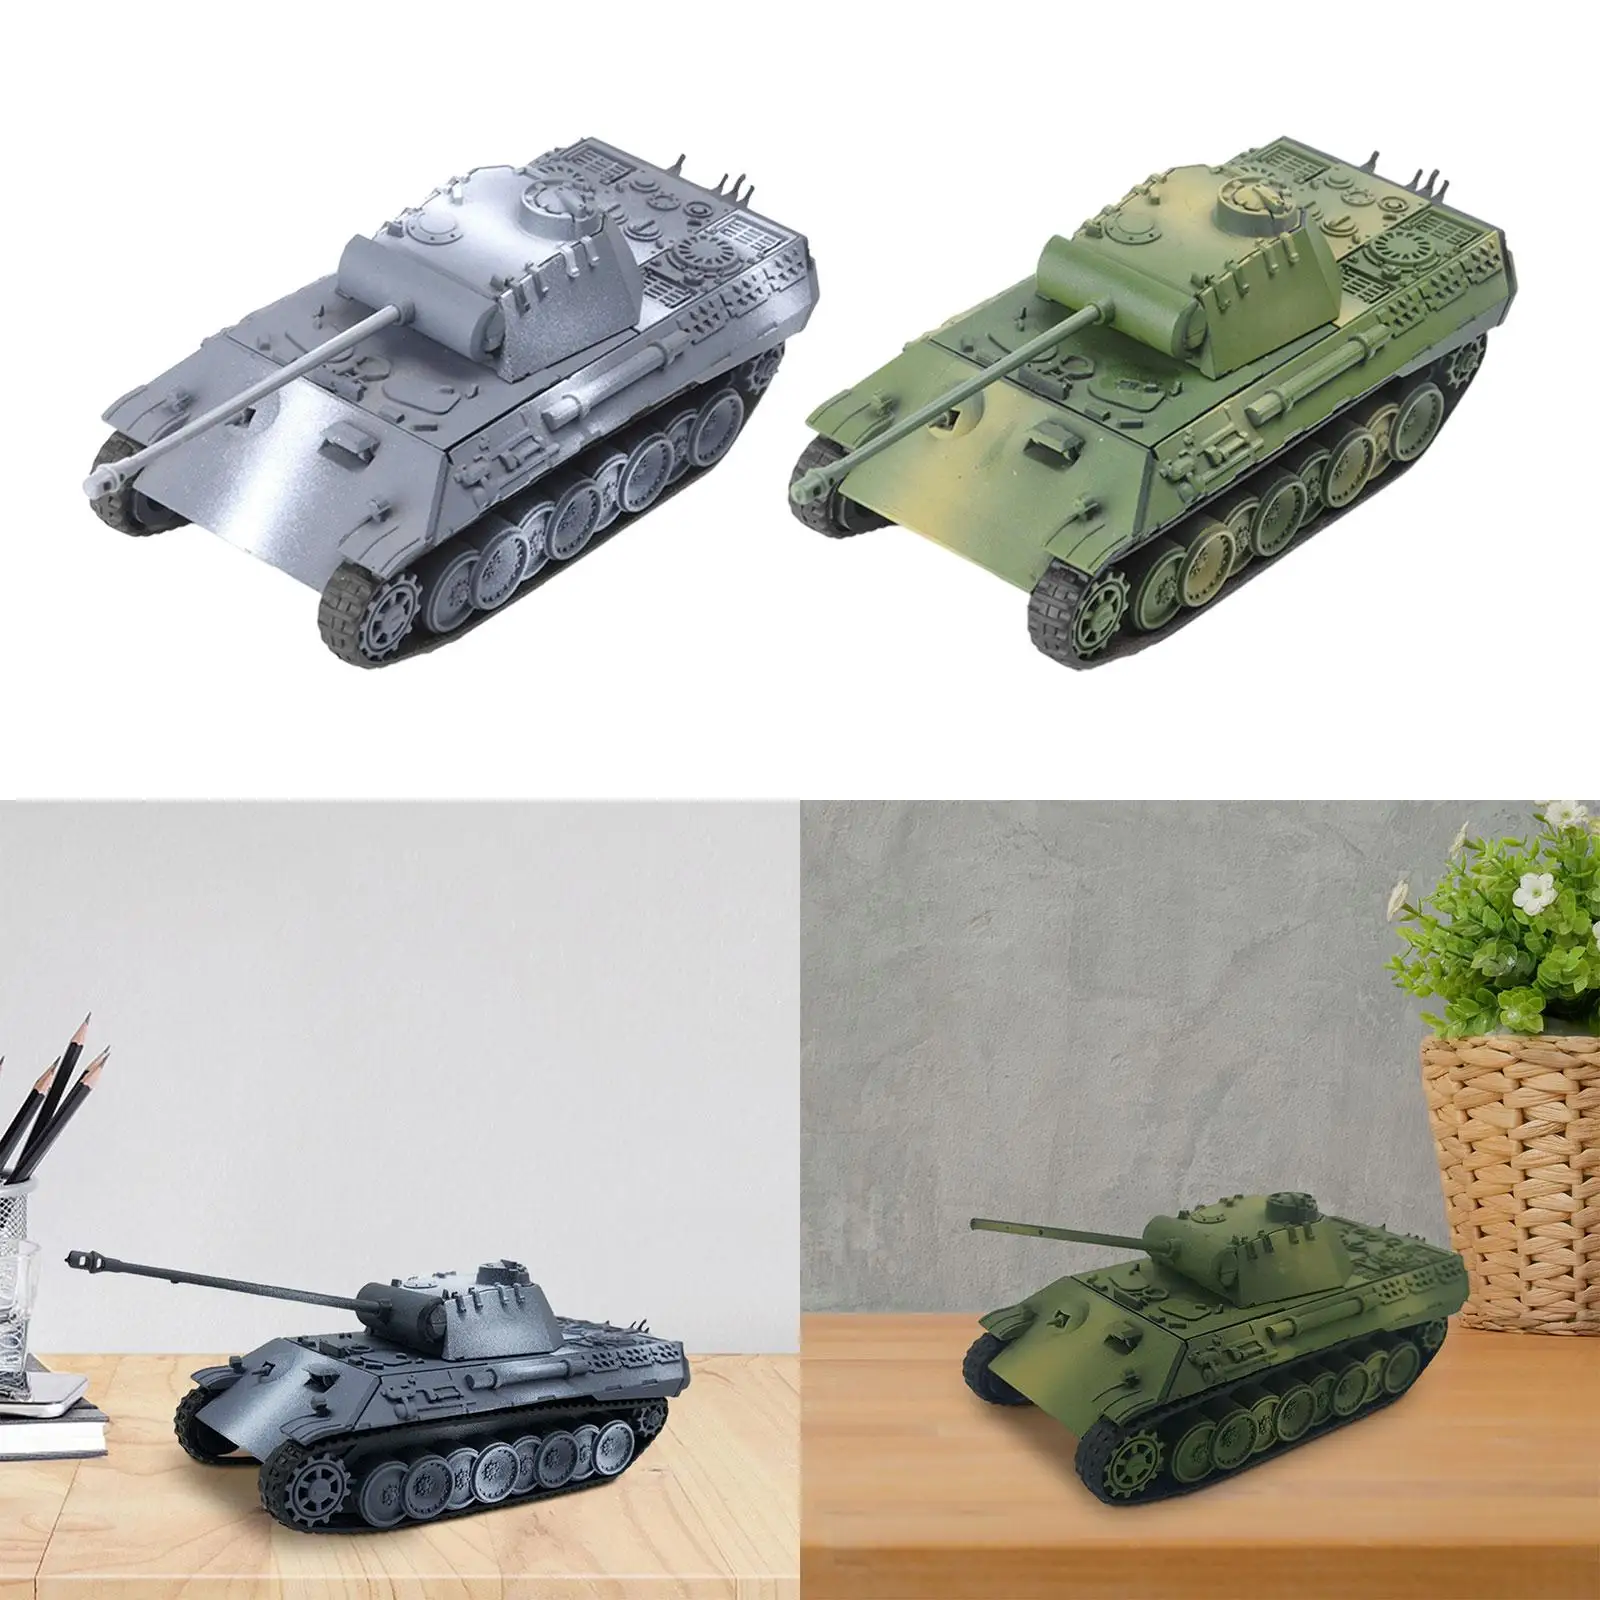 1:72 Scale 4D Tank Model DIY Assemble Simulation Vehicle Tank Model Toy Collection for Adults Girls Children Kids Birthday Gift